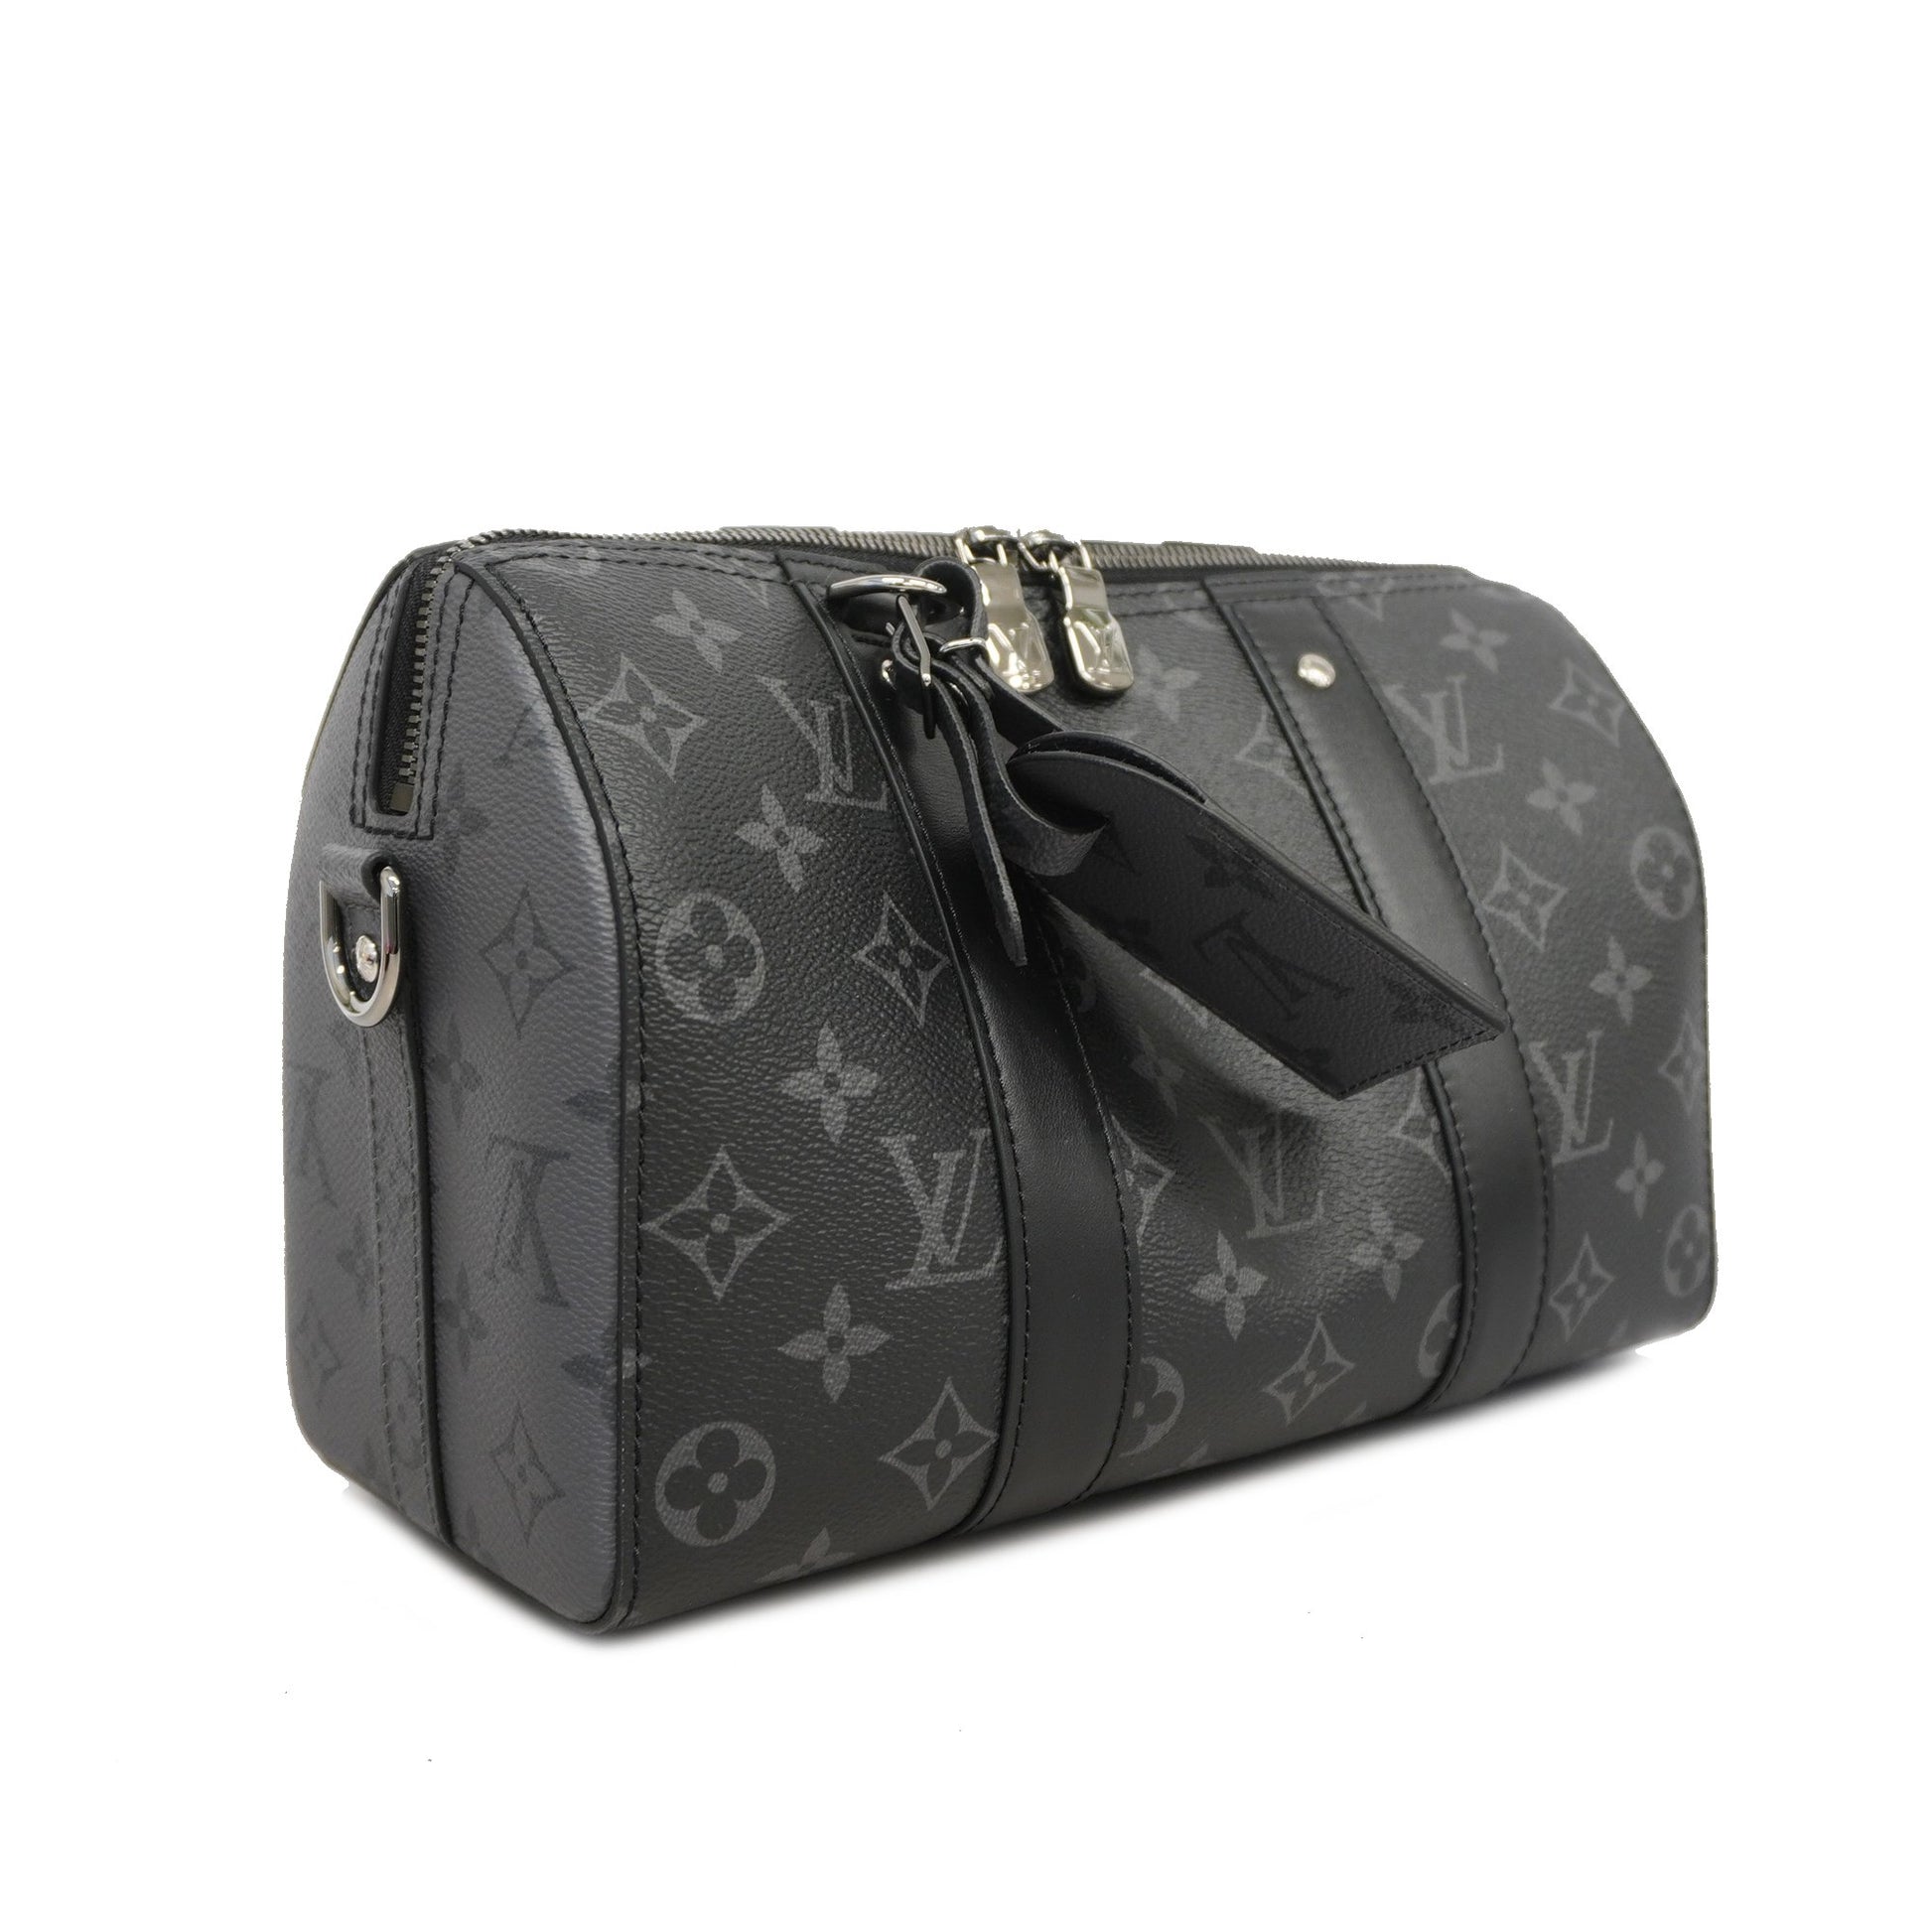 Shop Louis Vuitton Keepall City keepall (M45936) by pipi77